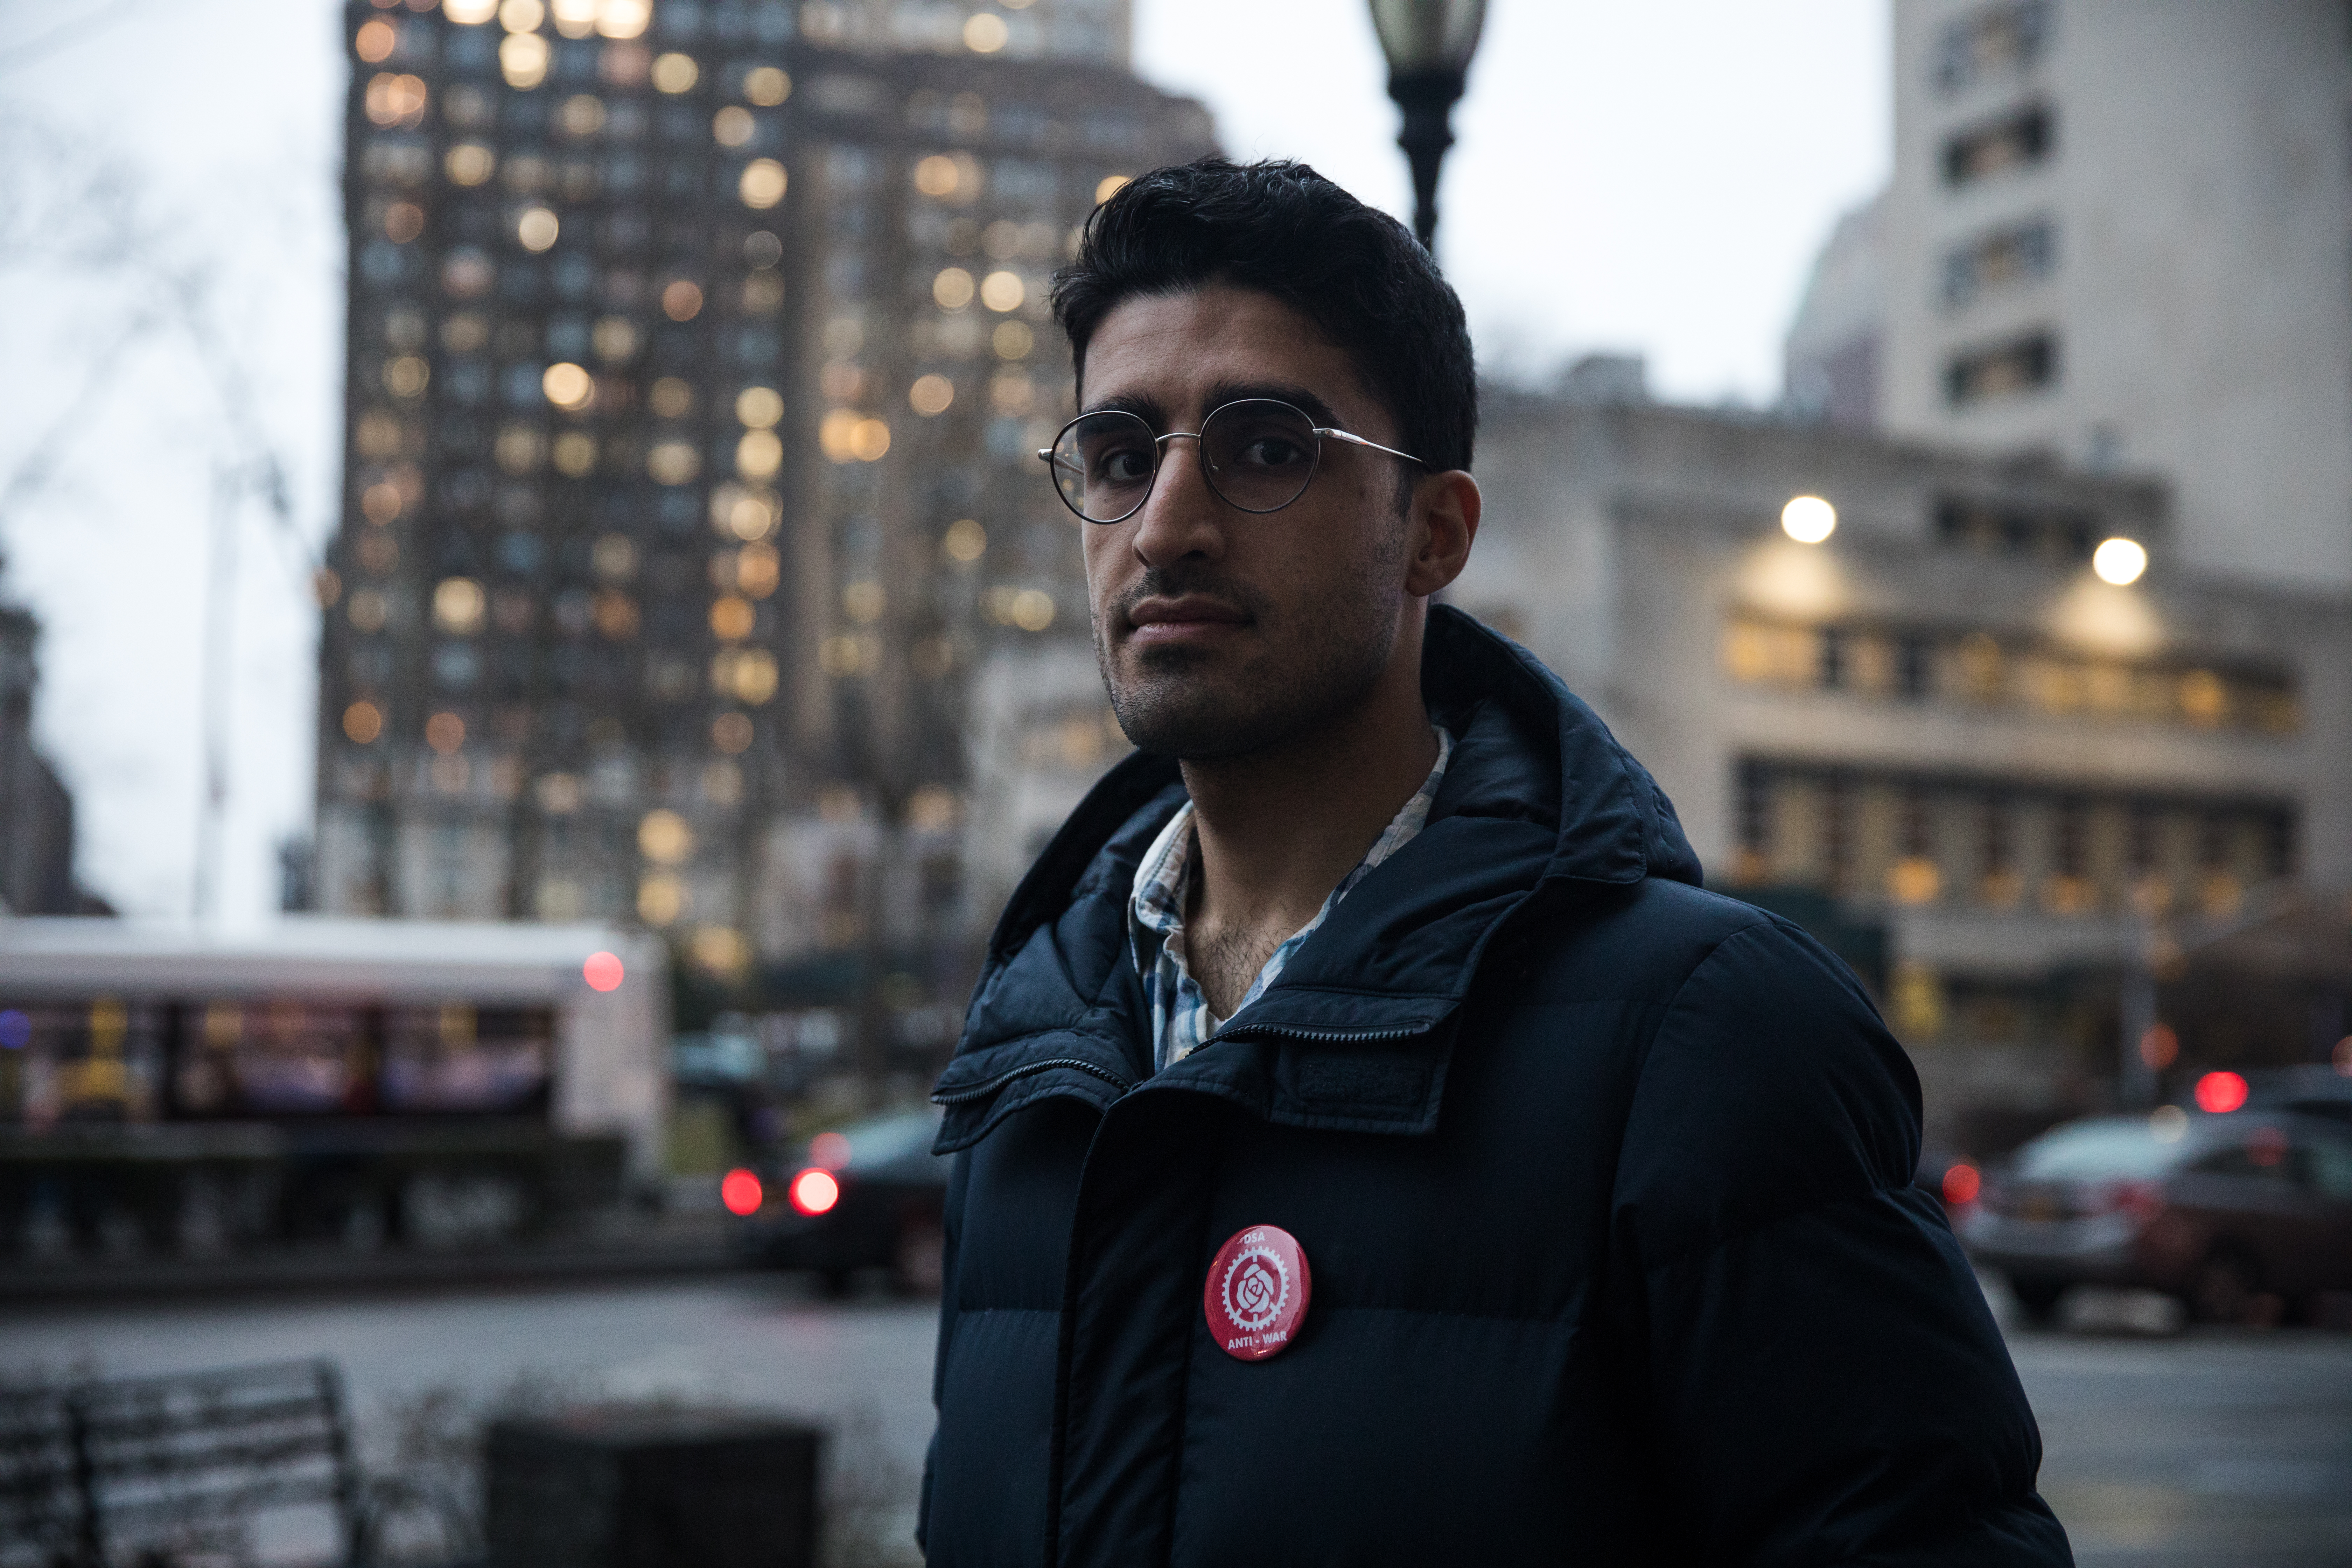 Sepehr Makaremi has been living in New York for about eight years. In addition to his day job as an IT Engineer, he volunteers with New York City Democratic Socialists of America's Anti-War Working Group. Photo: Paul Frangipane/Brooklyn Eagle